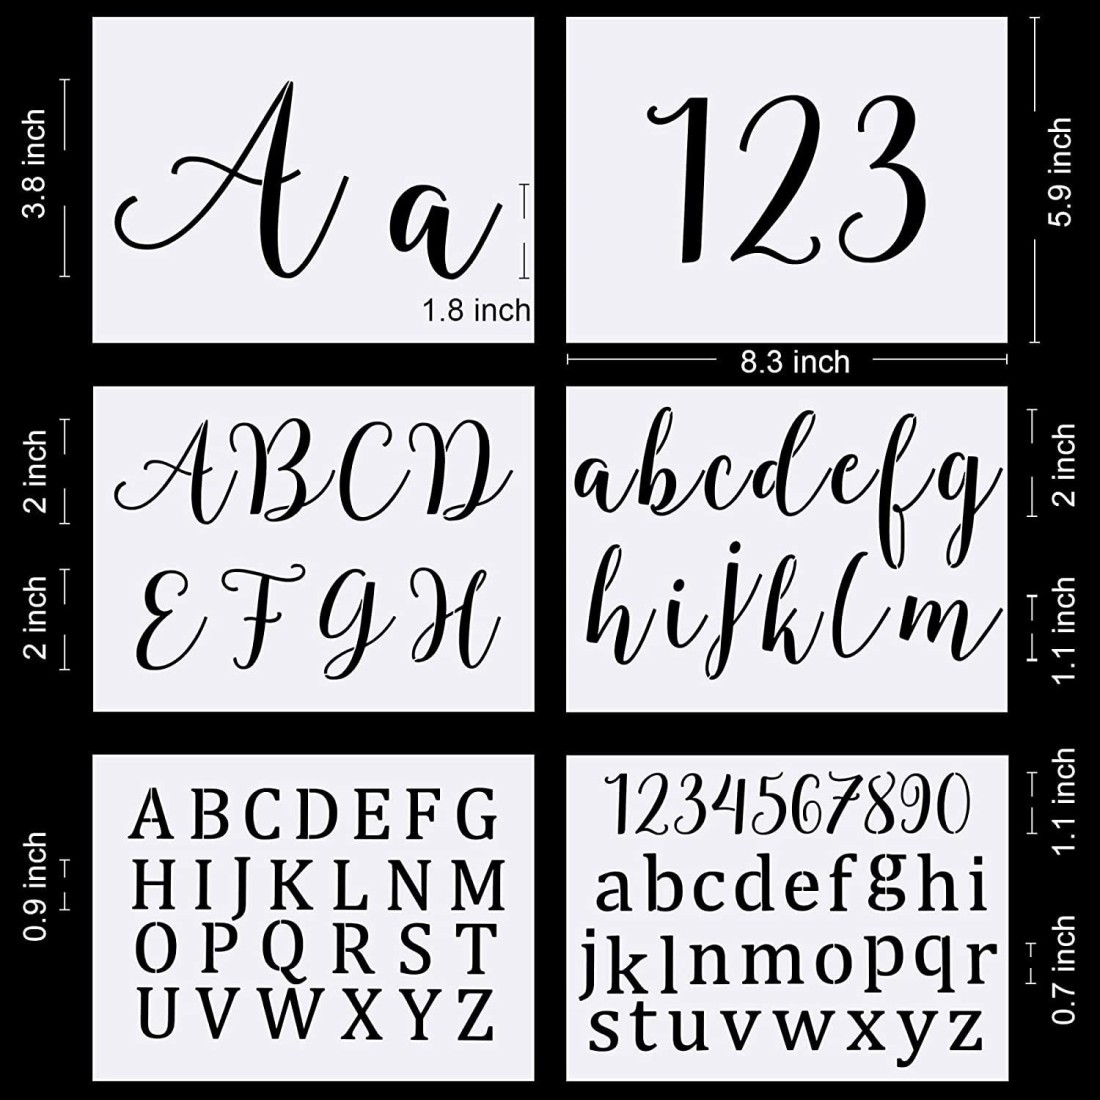 Letter Stencils for Painting on Wood - Alphabet Stencils with Calligraphy  Large Font and Cursive Letters Numbers Signs - Reusable Plastic Art Craft